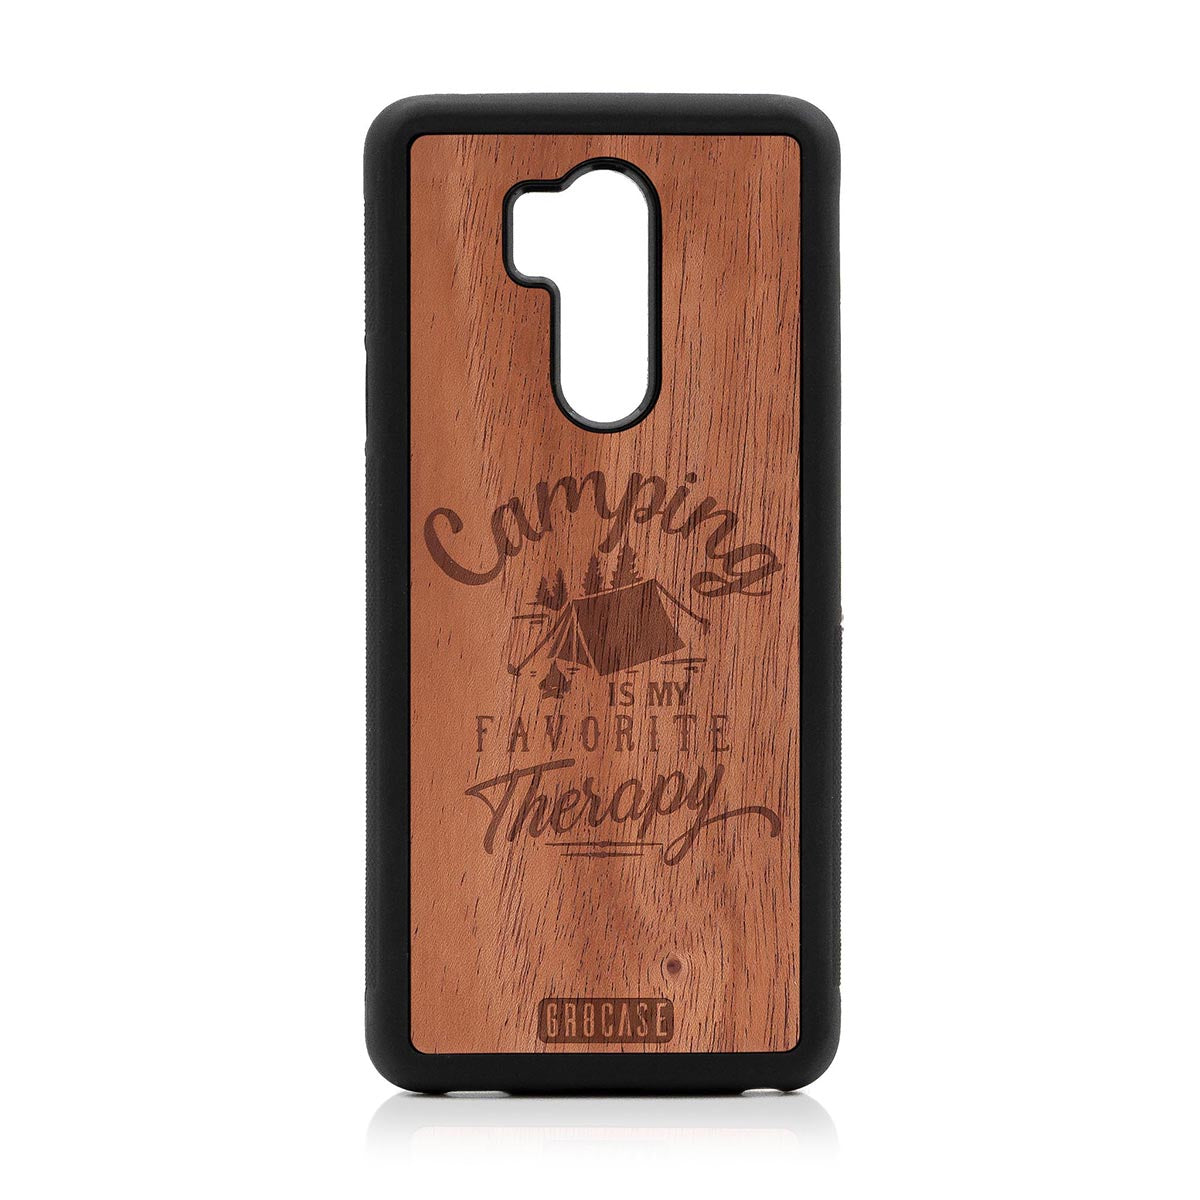 Camping Is My Favorite Therapy Design Wood Case For LG G7 ThinQ by GR8CASE